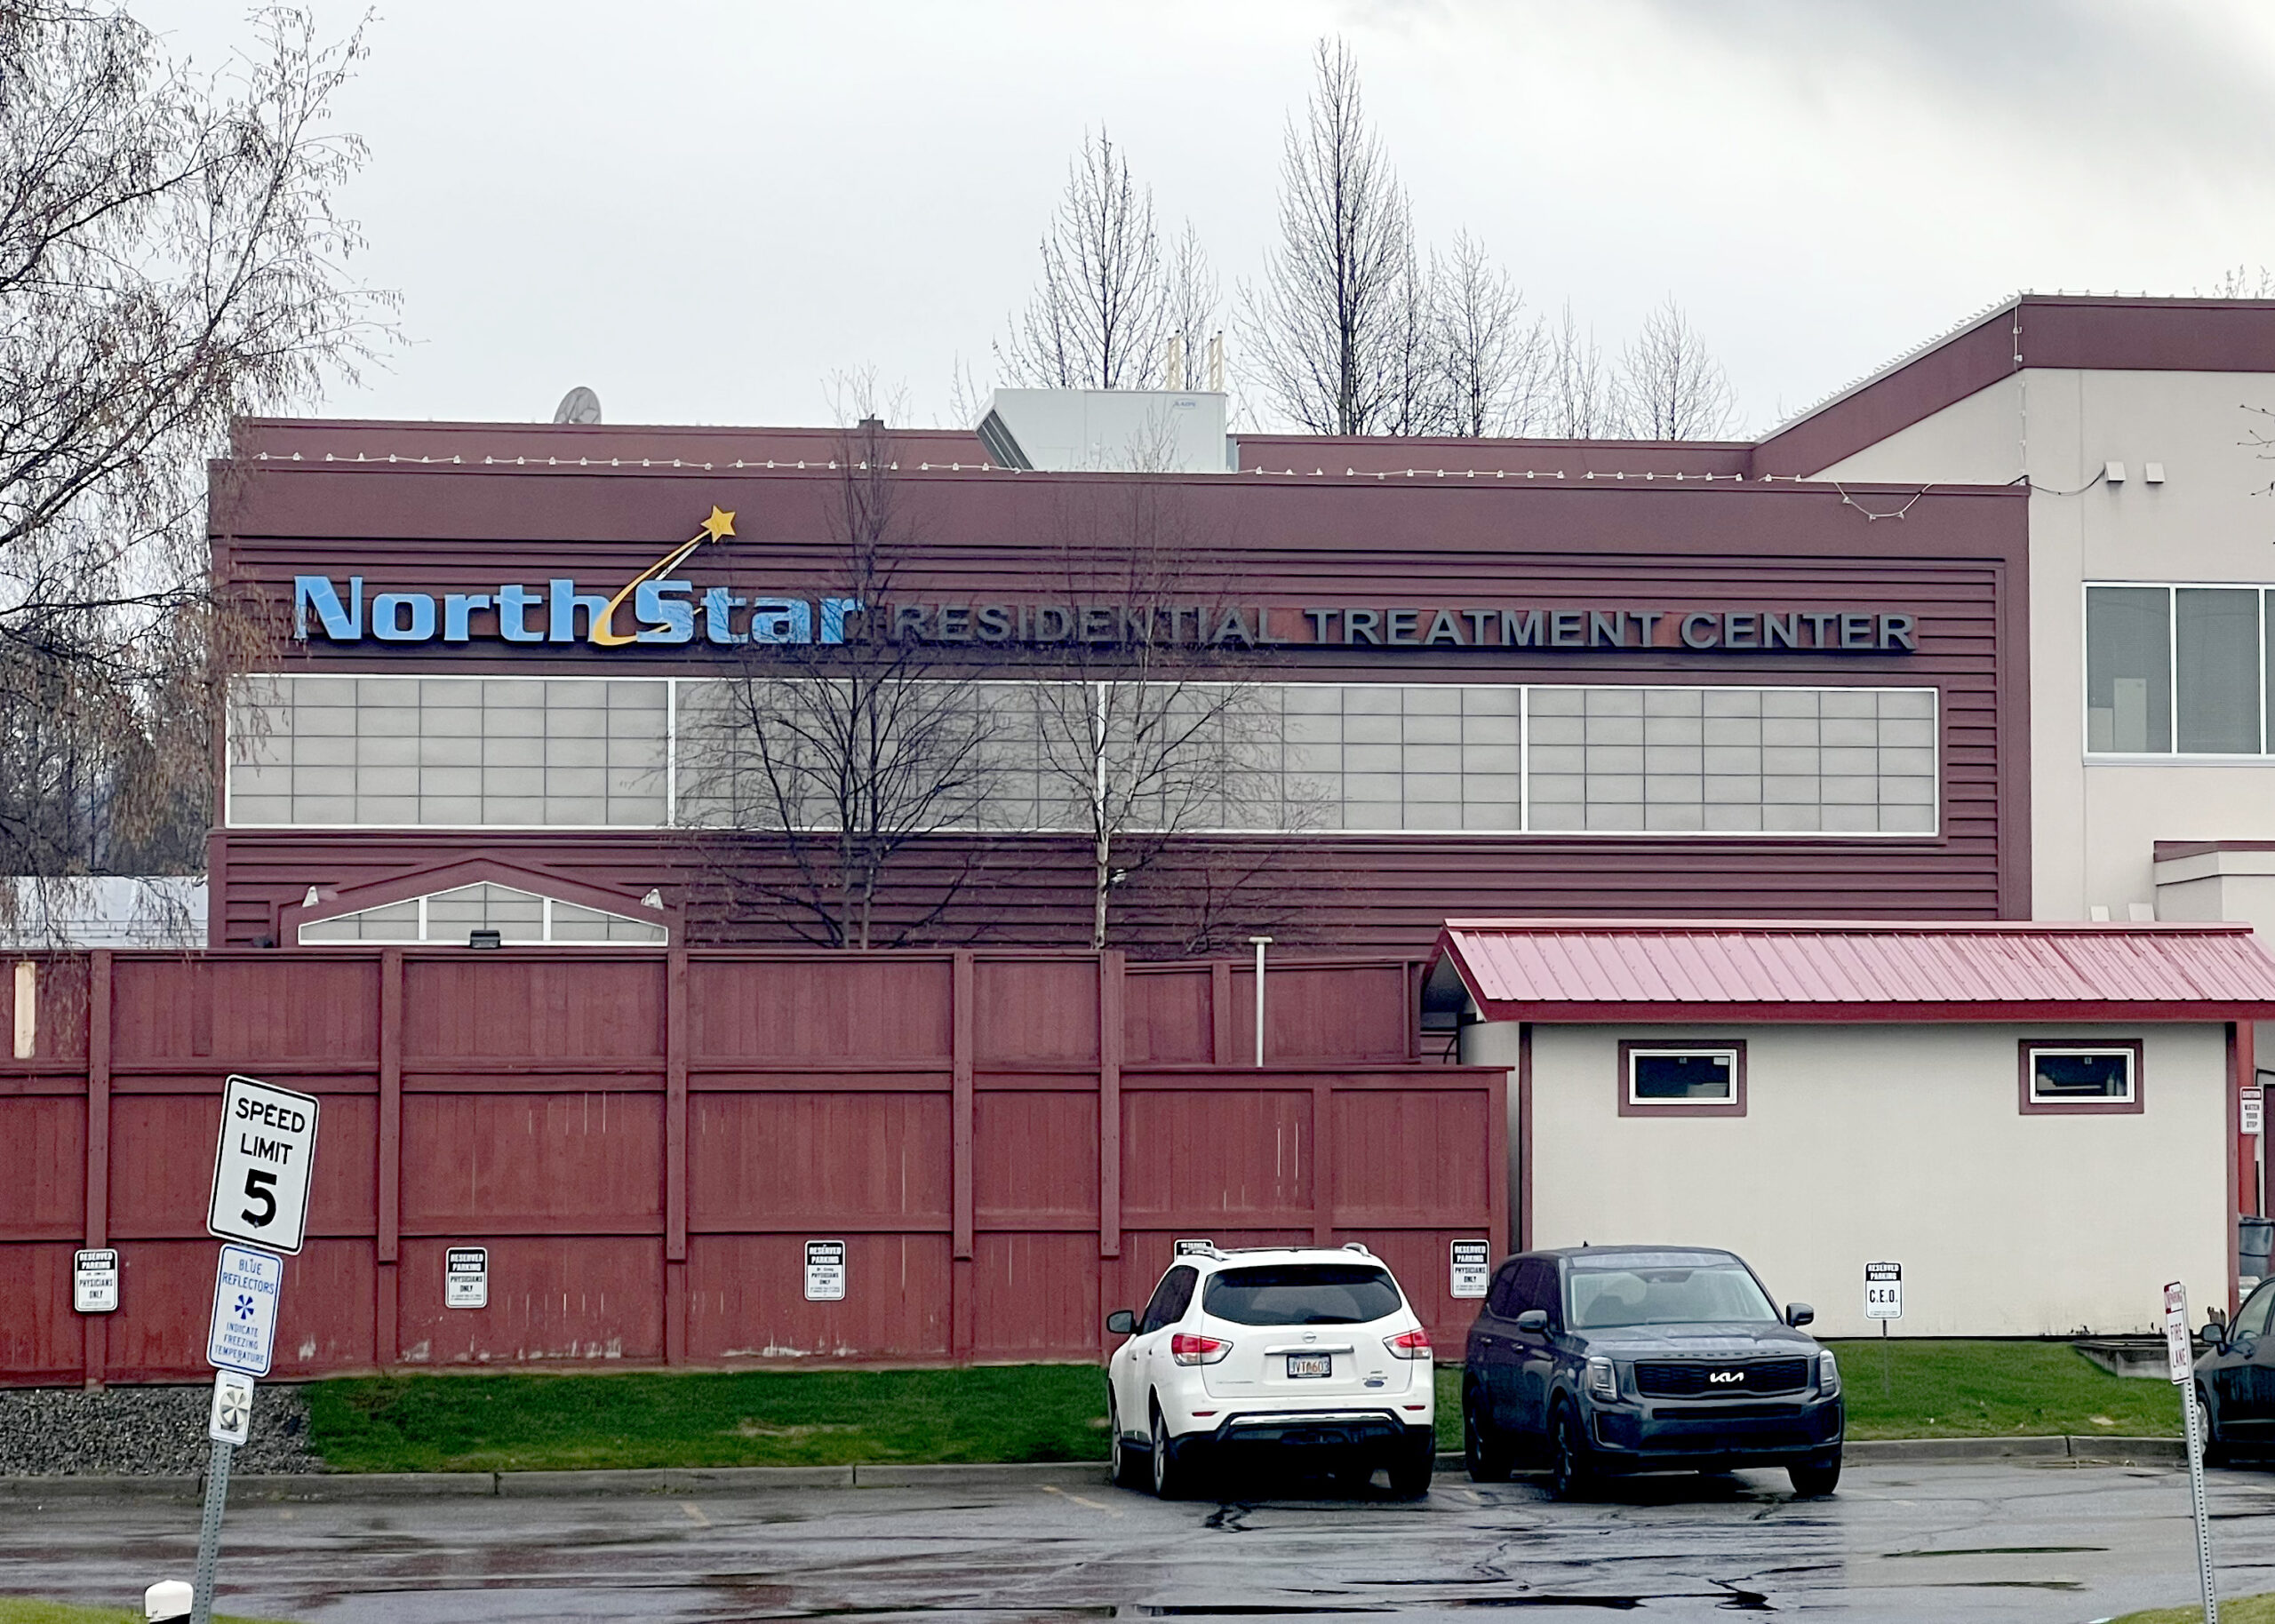 A maroon building with blue lettering that says "North Star Residential Treatment Center"